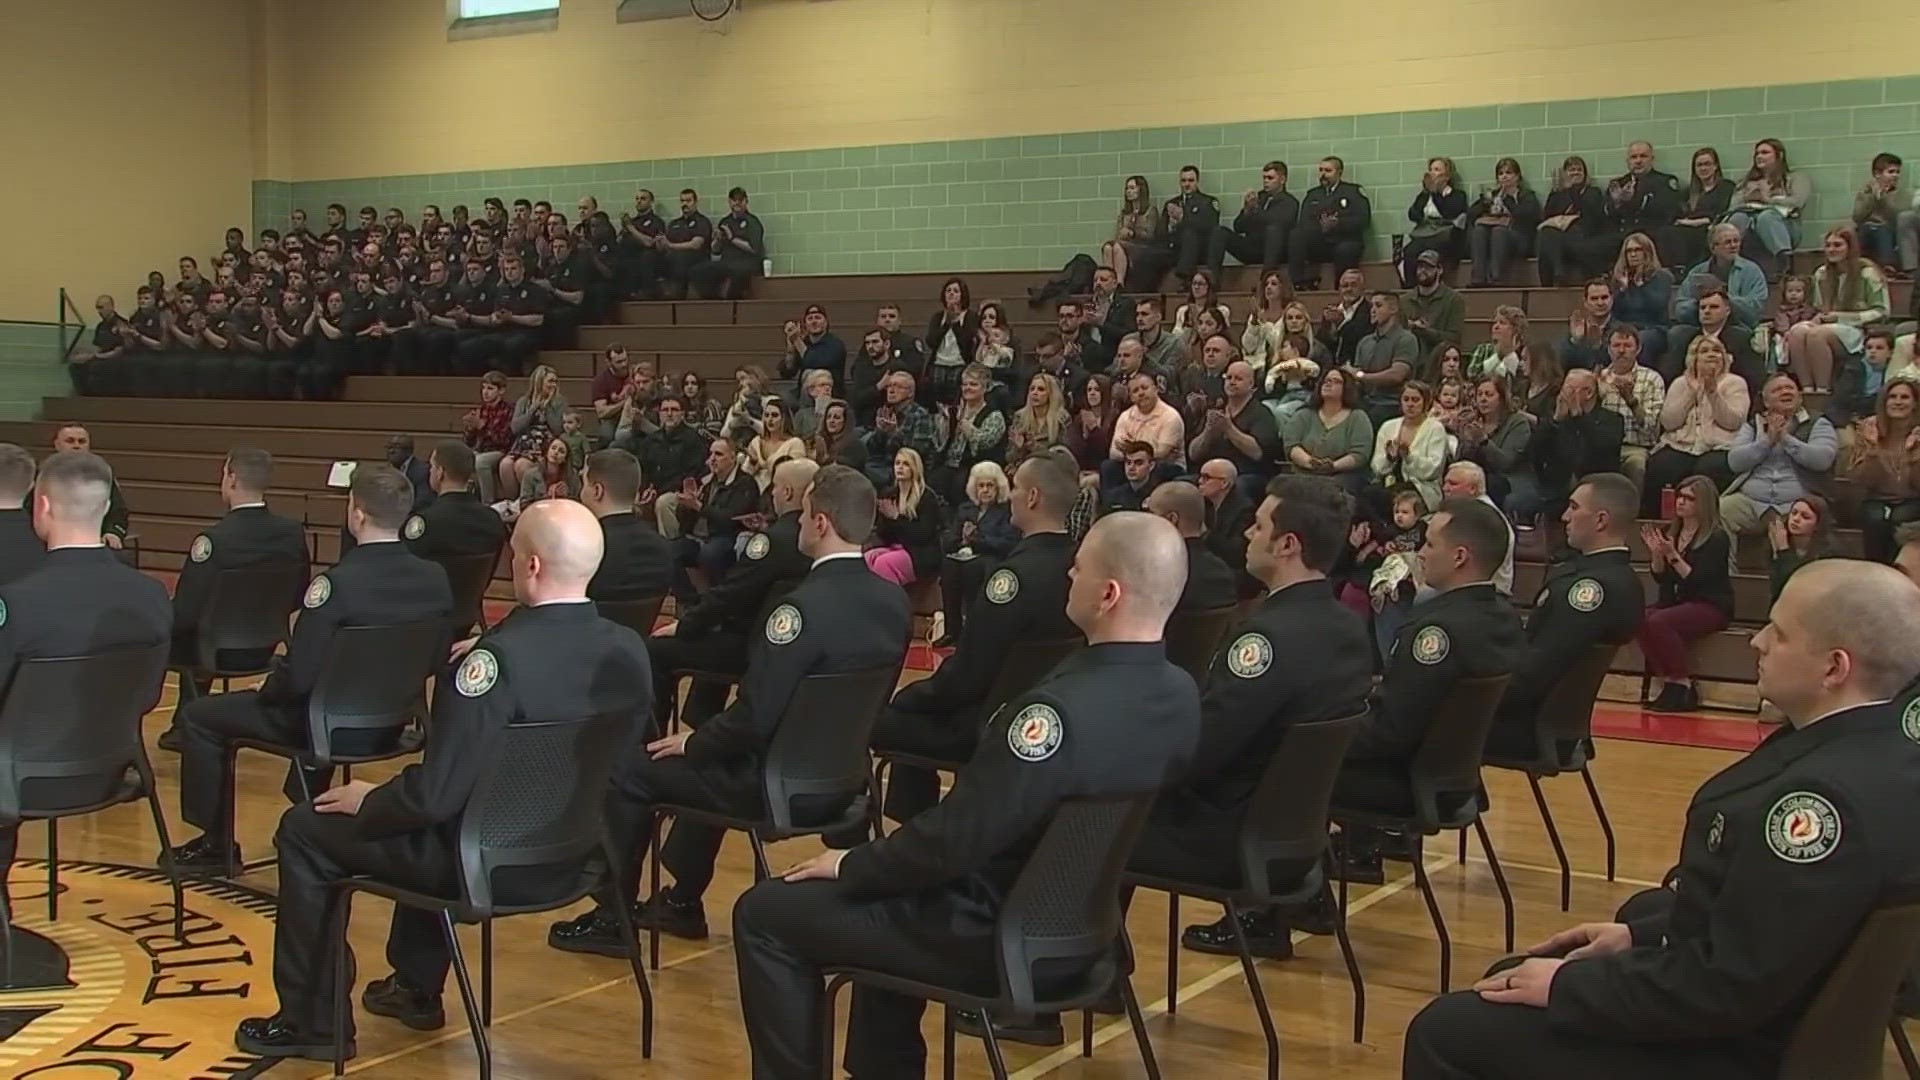 For the first time in the division's history, the city had not one, but two classes graduate on Friday. In total, nearly 70 firefighters will join the ranks.